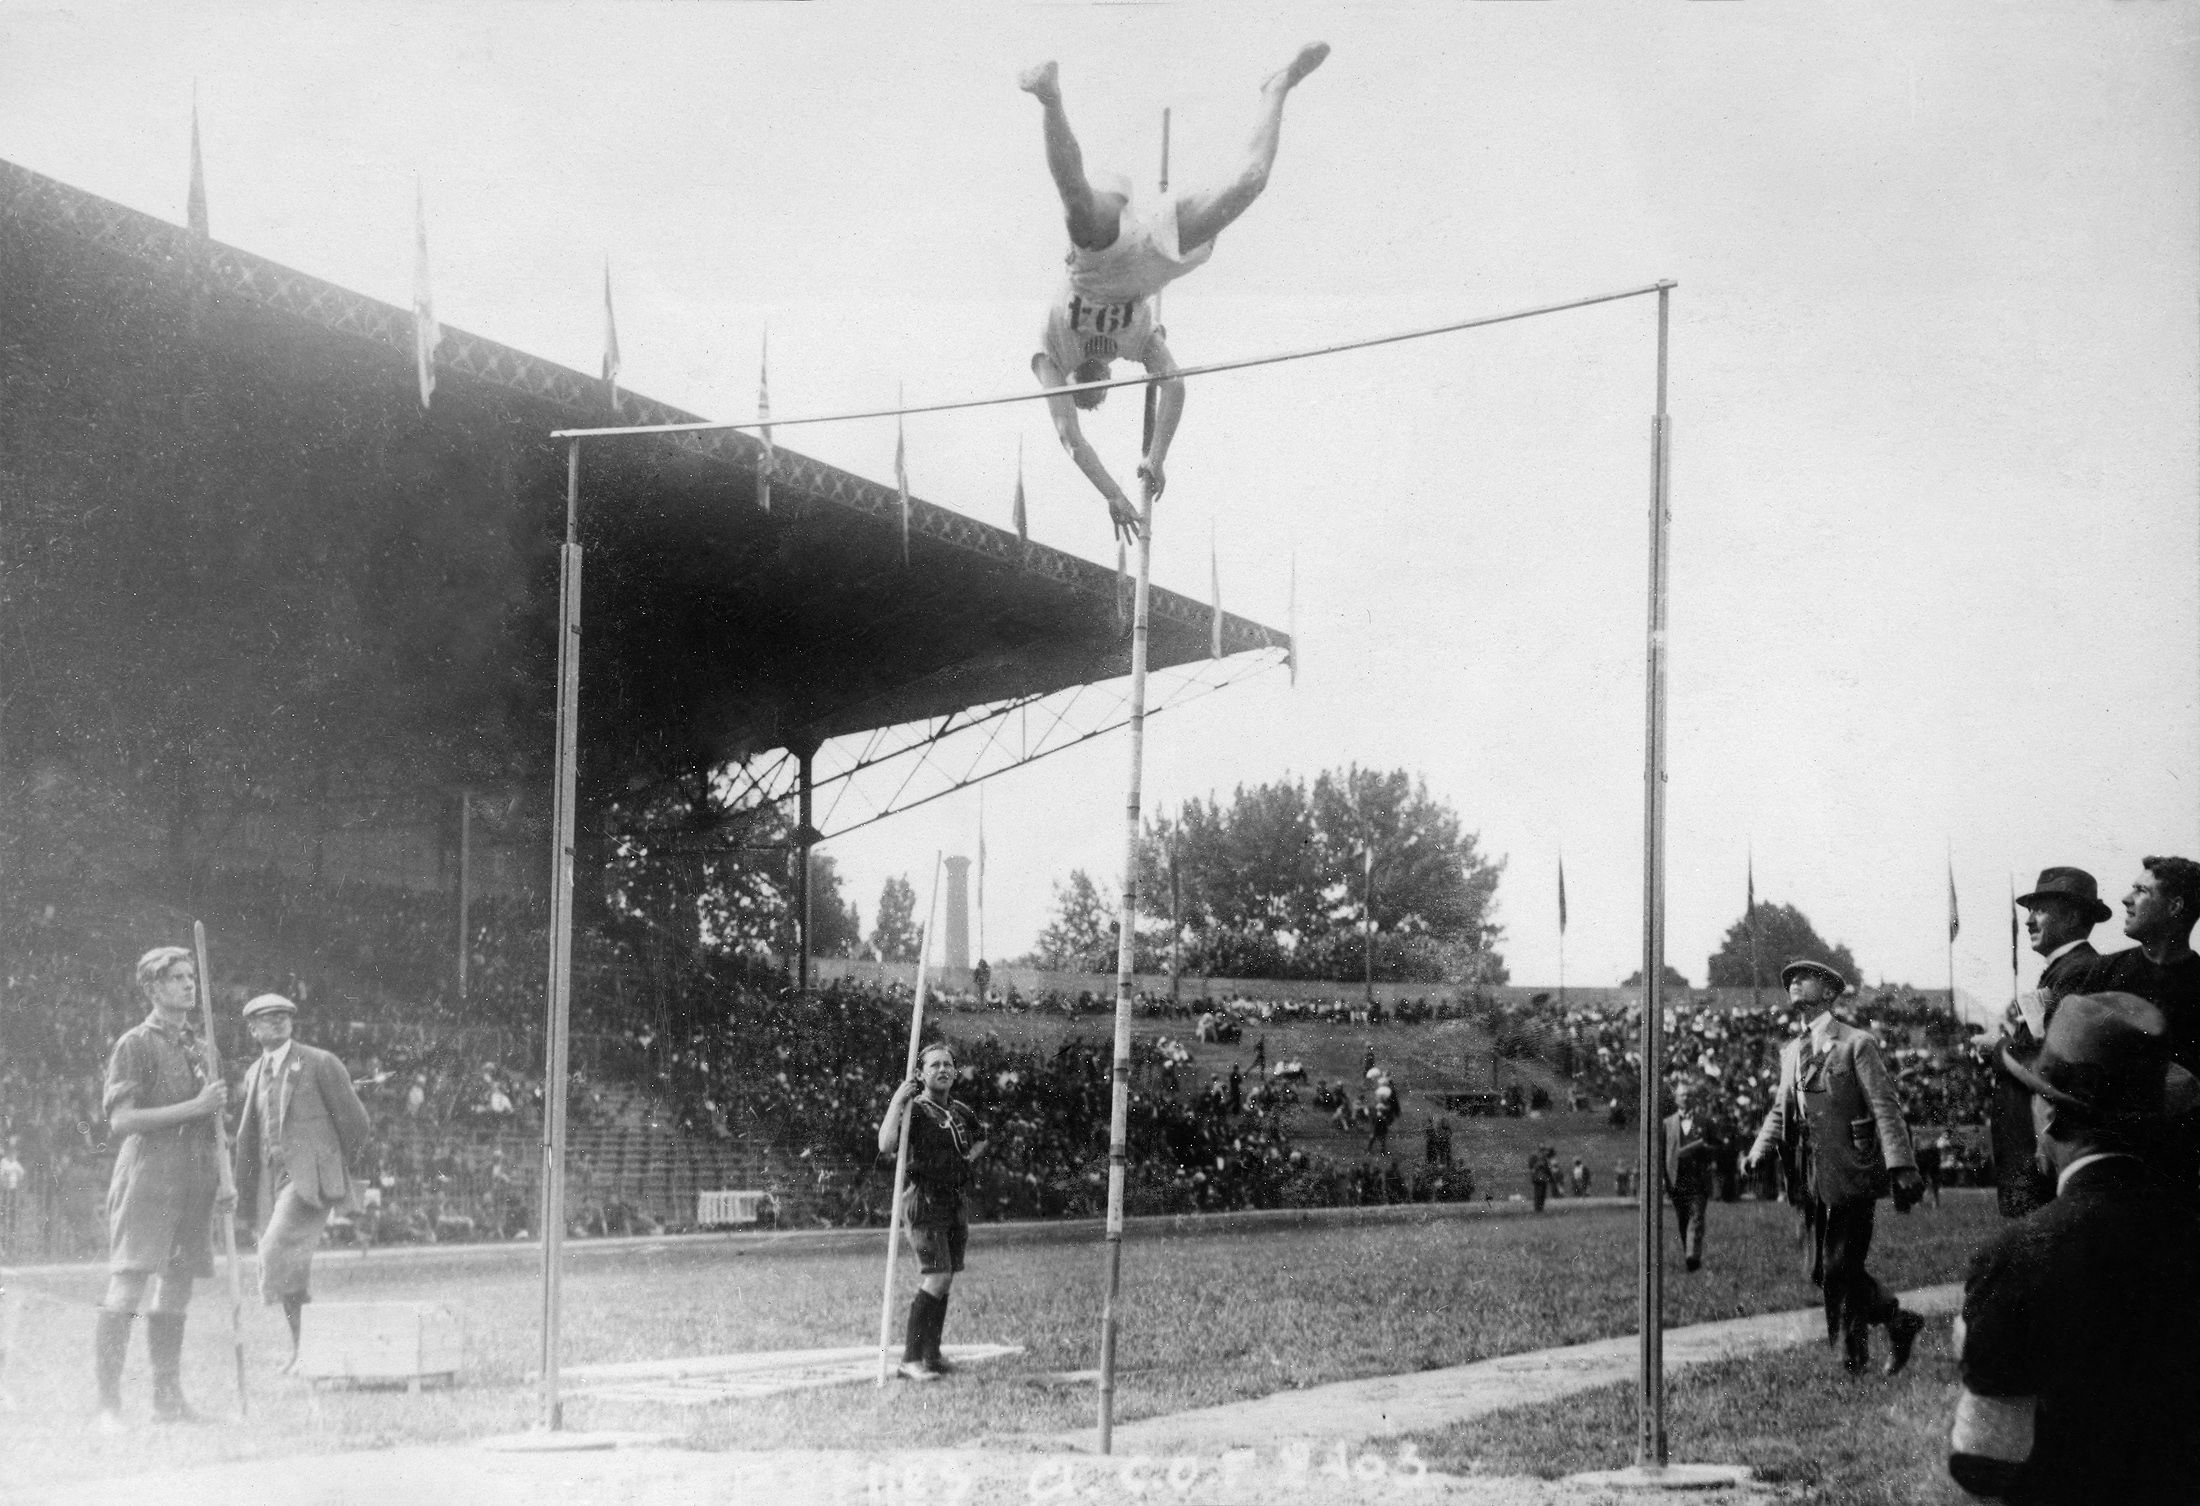 Lee Barnes in the pole vault at the 1924 Olympic Games